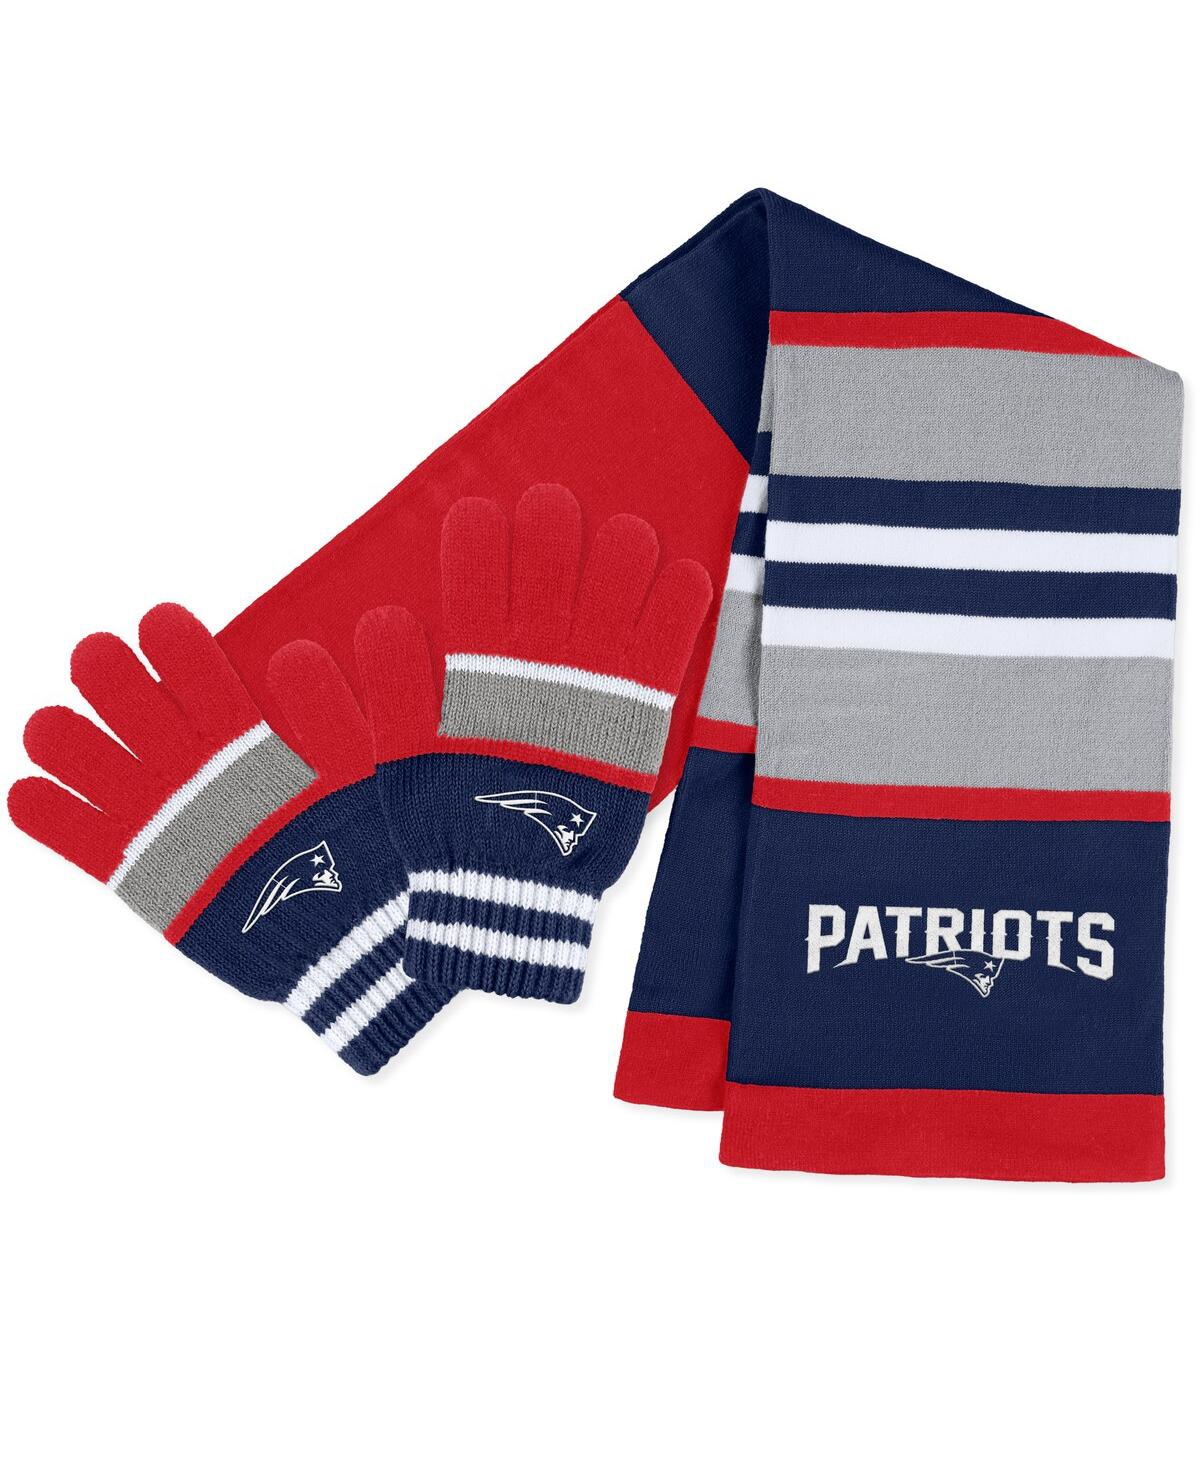 Wear By Erin Andrews Women's  New England Patriots Stripe Glove And Scarf Set In Red,navy